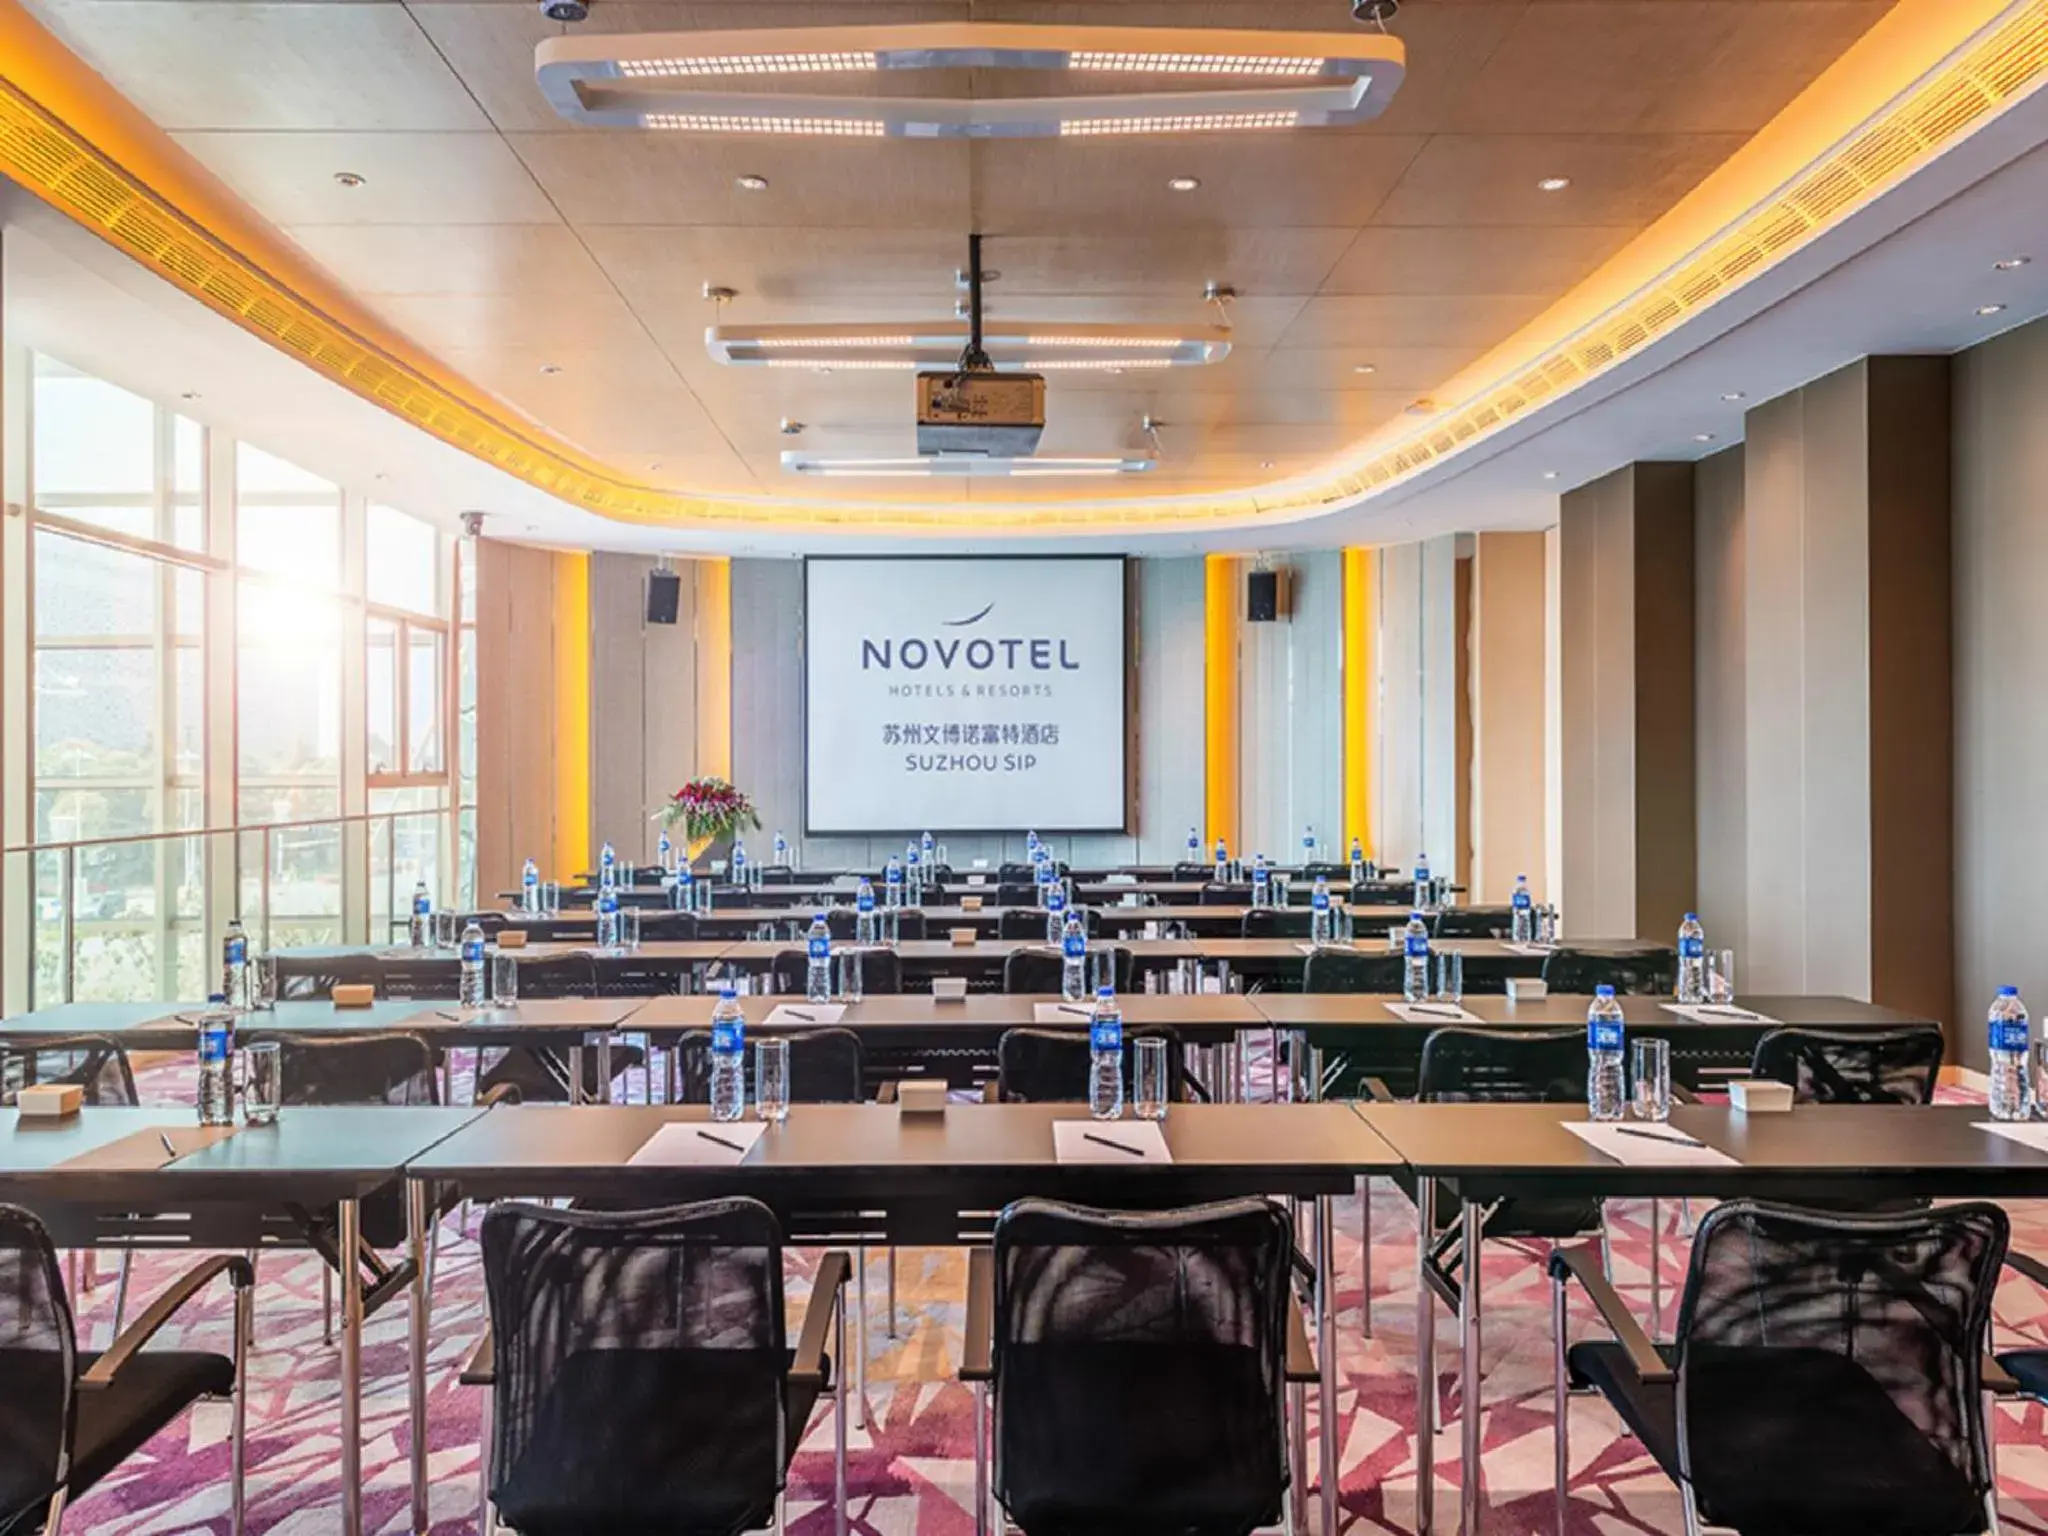 Meeting/conference room in Novotel Suzhou Sip